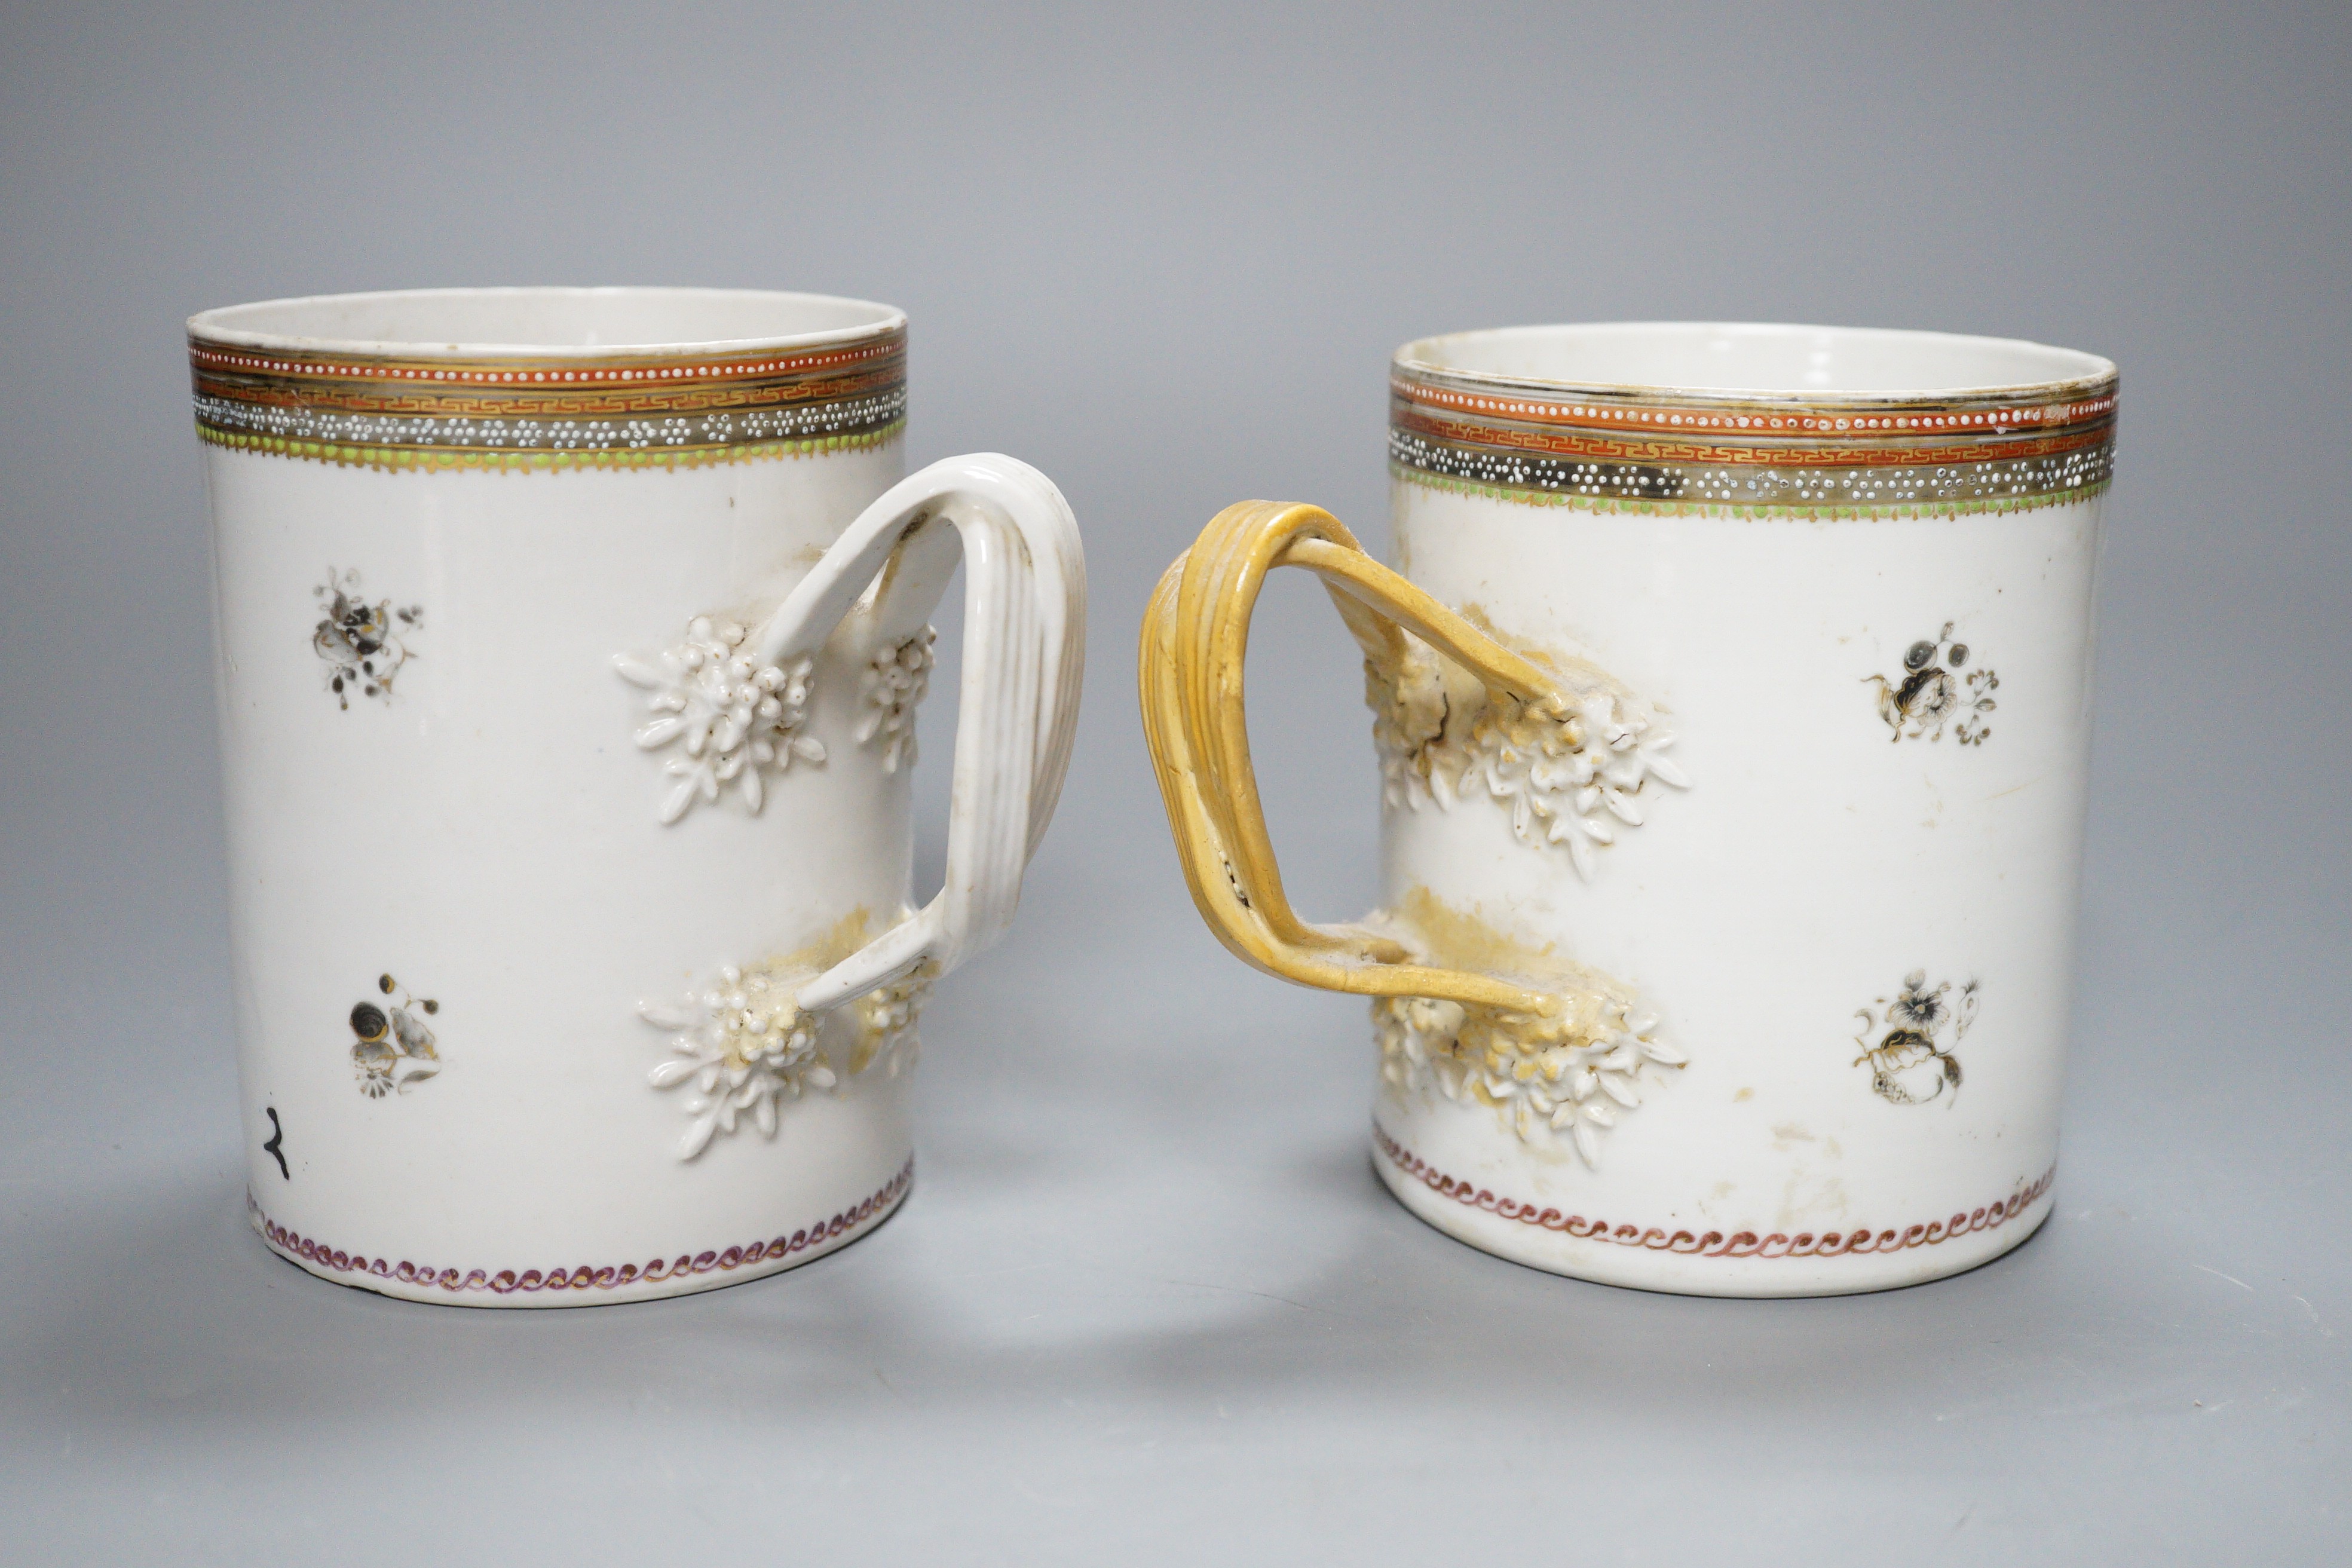 A pair of 18th century Chinese export cylindrical mugs, 13cm